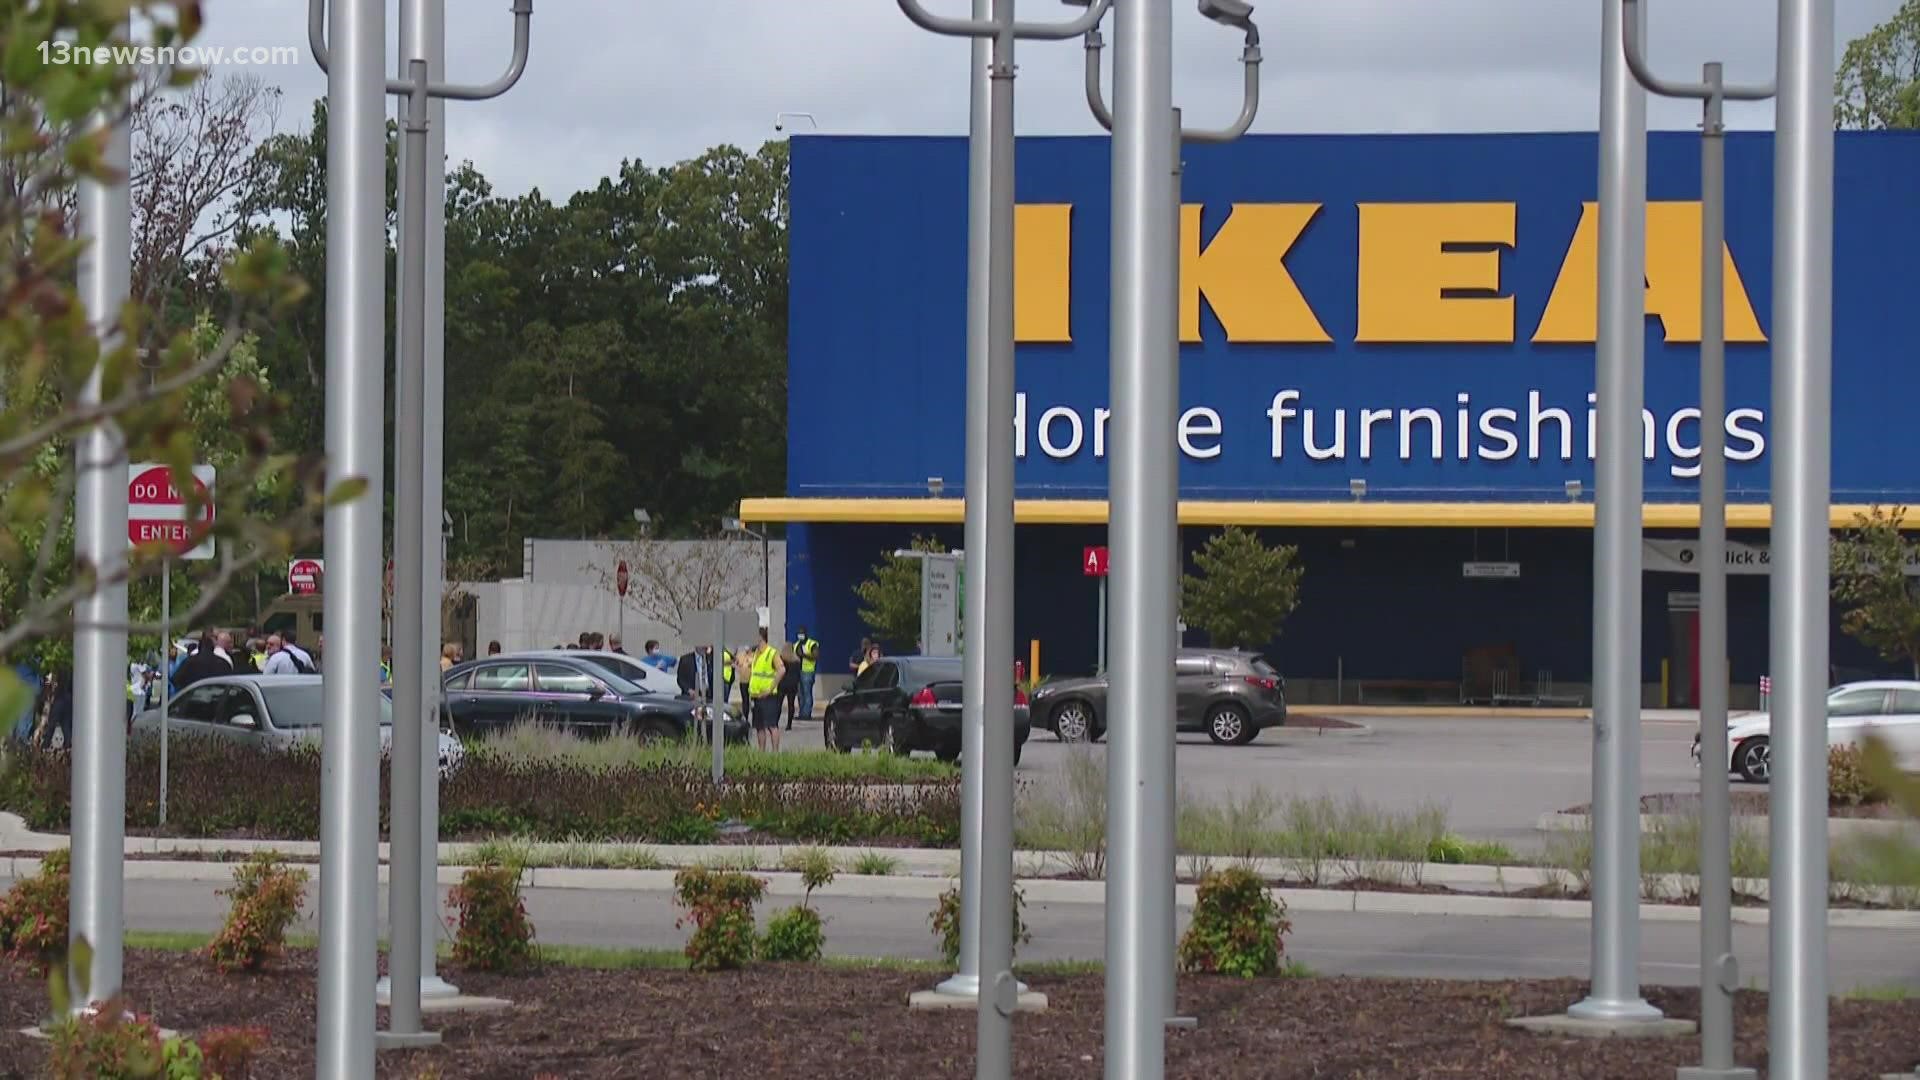 According to the Norfolk Police Department, the man was brandishing a firearm as cars passed near Northampton Boulevard and Ikea Way. No injuries were reported.